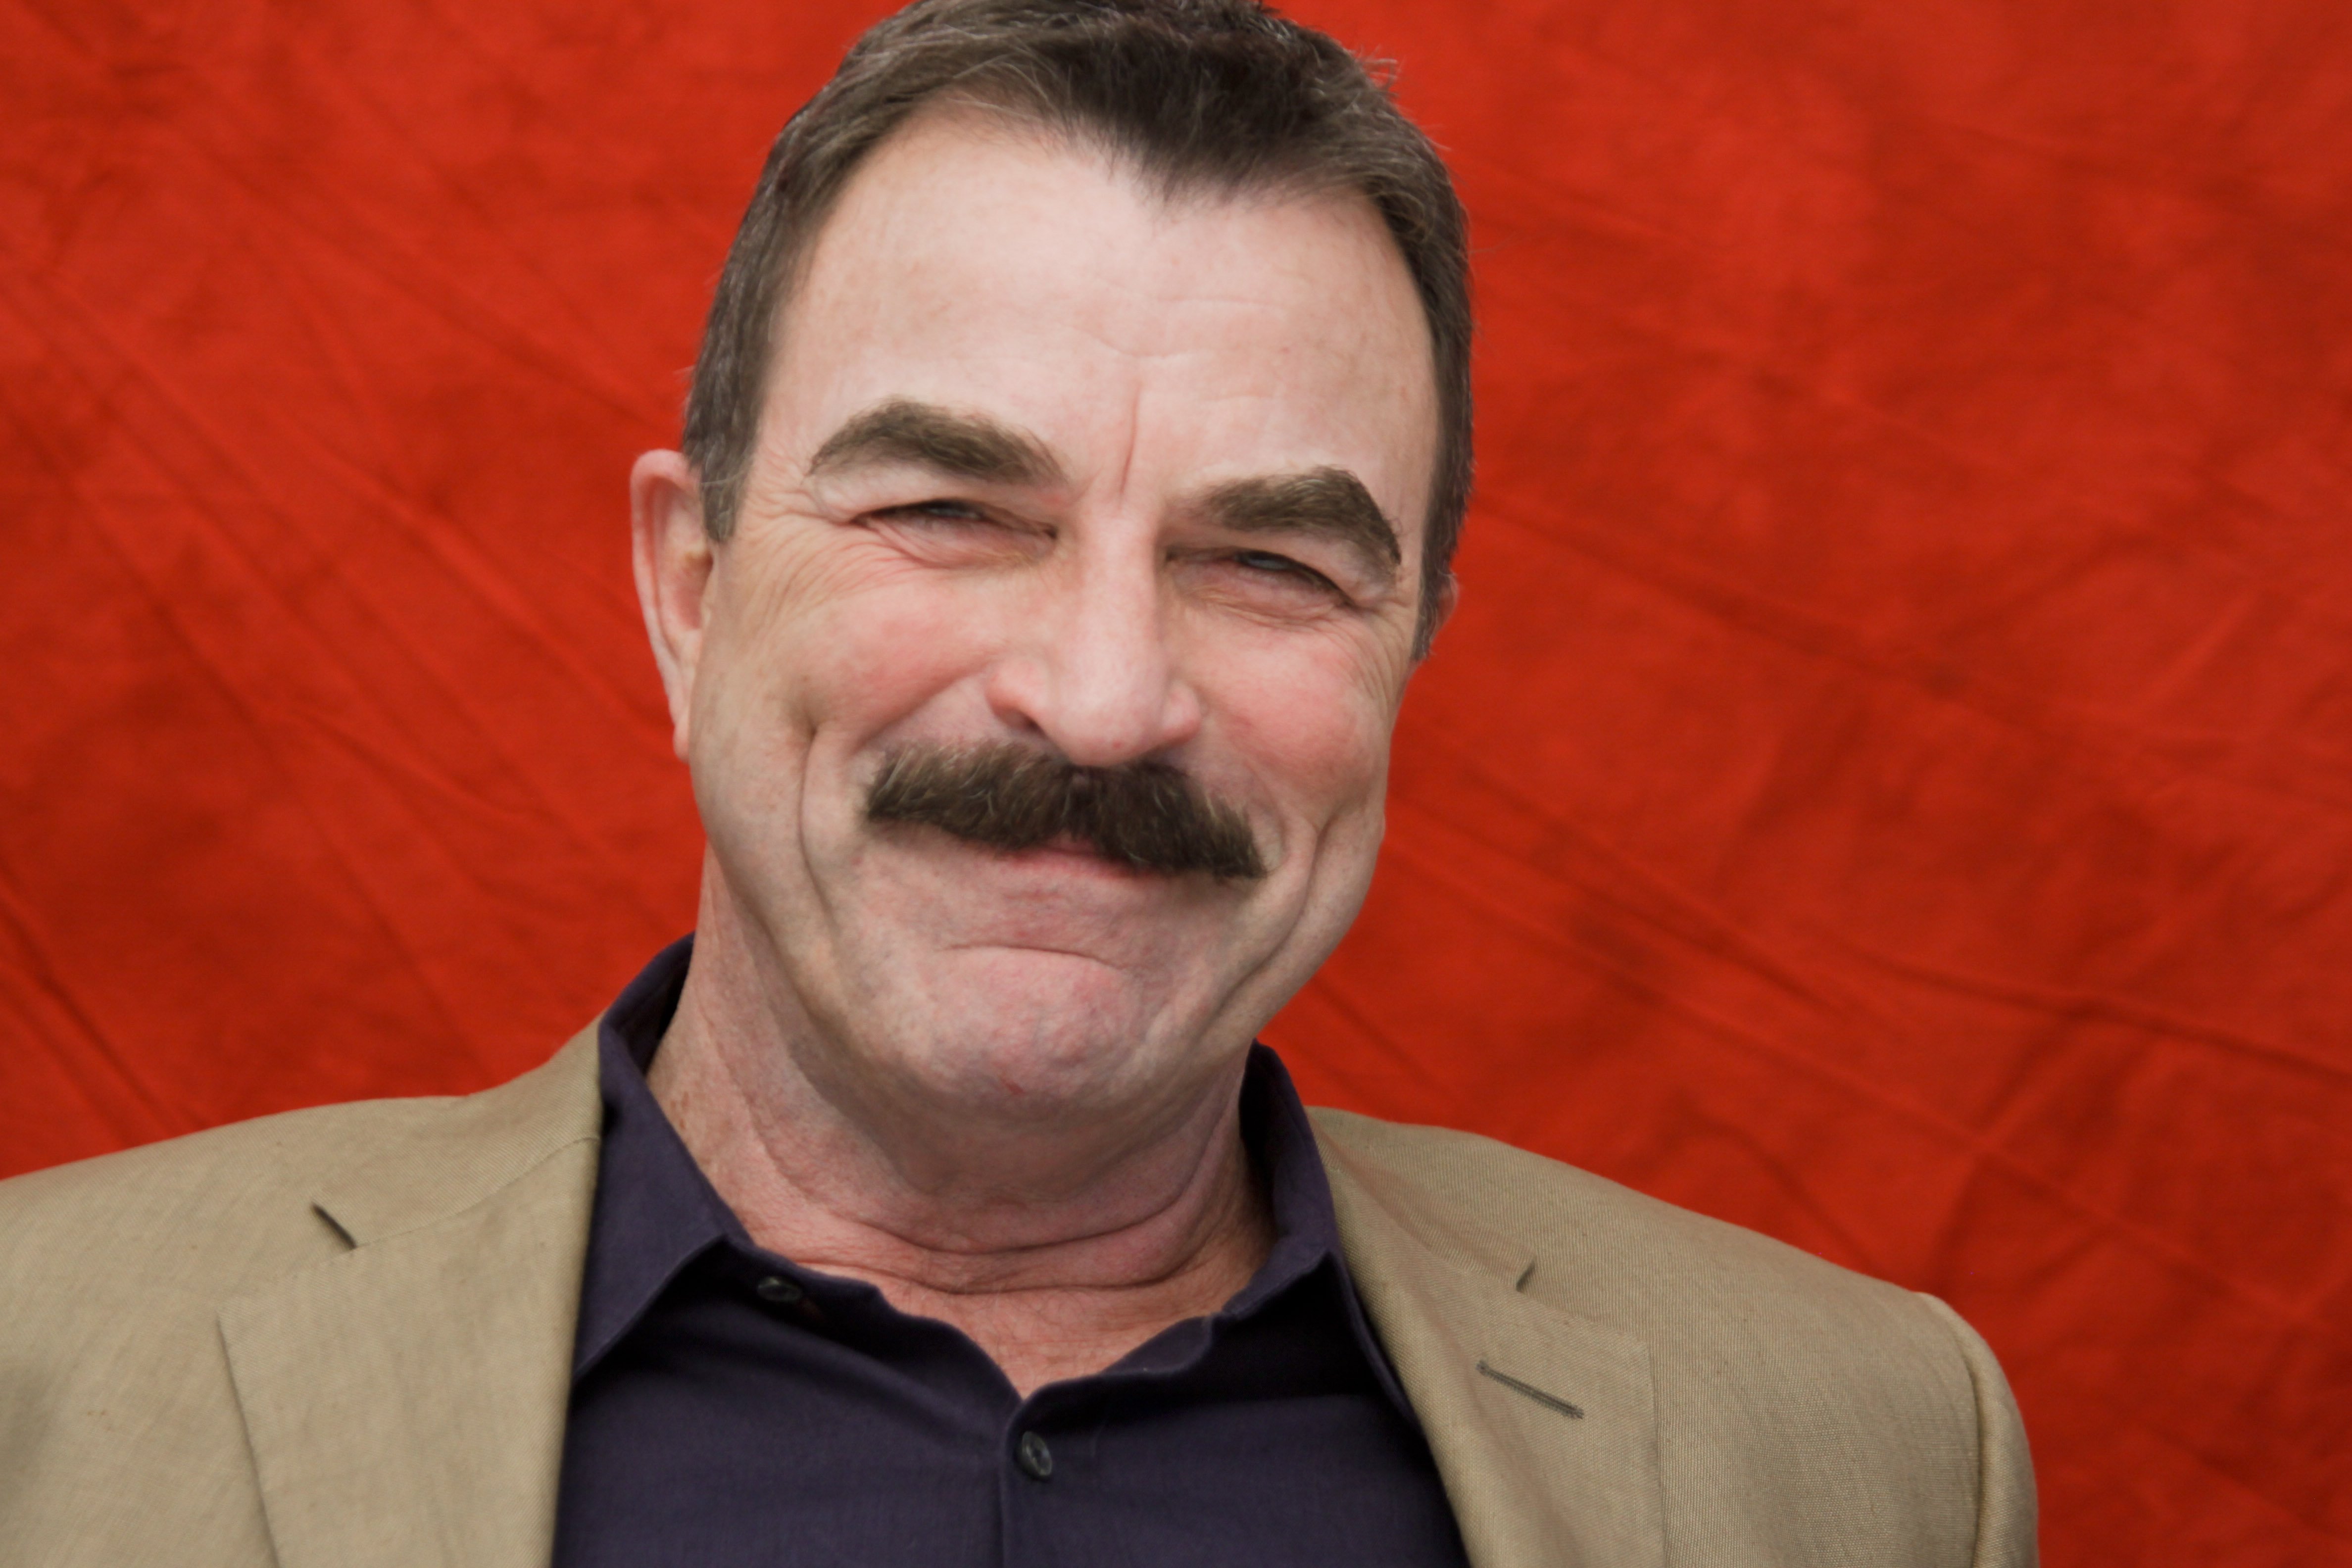 Tom Selleck during a portrait session in West Hollywood, California on August 16, 2010 | Photo: GettyImages